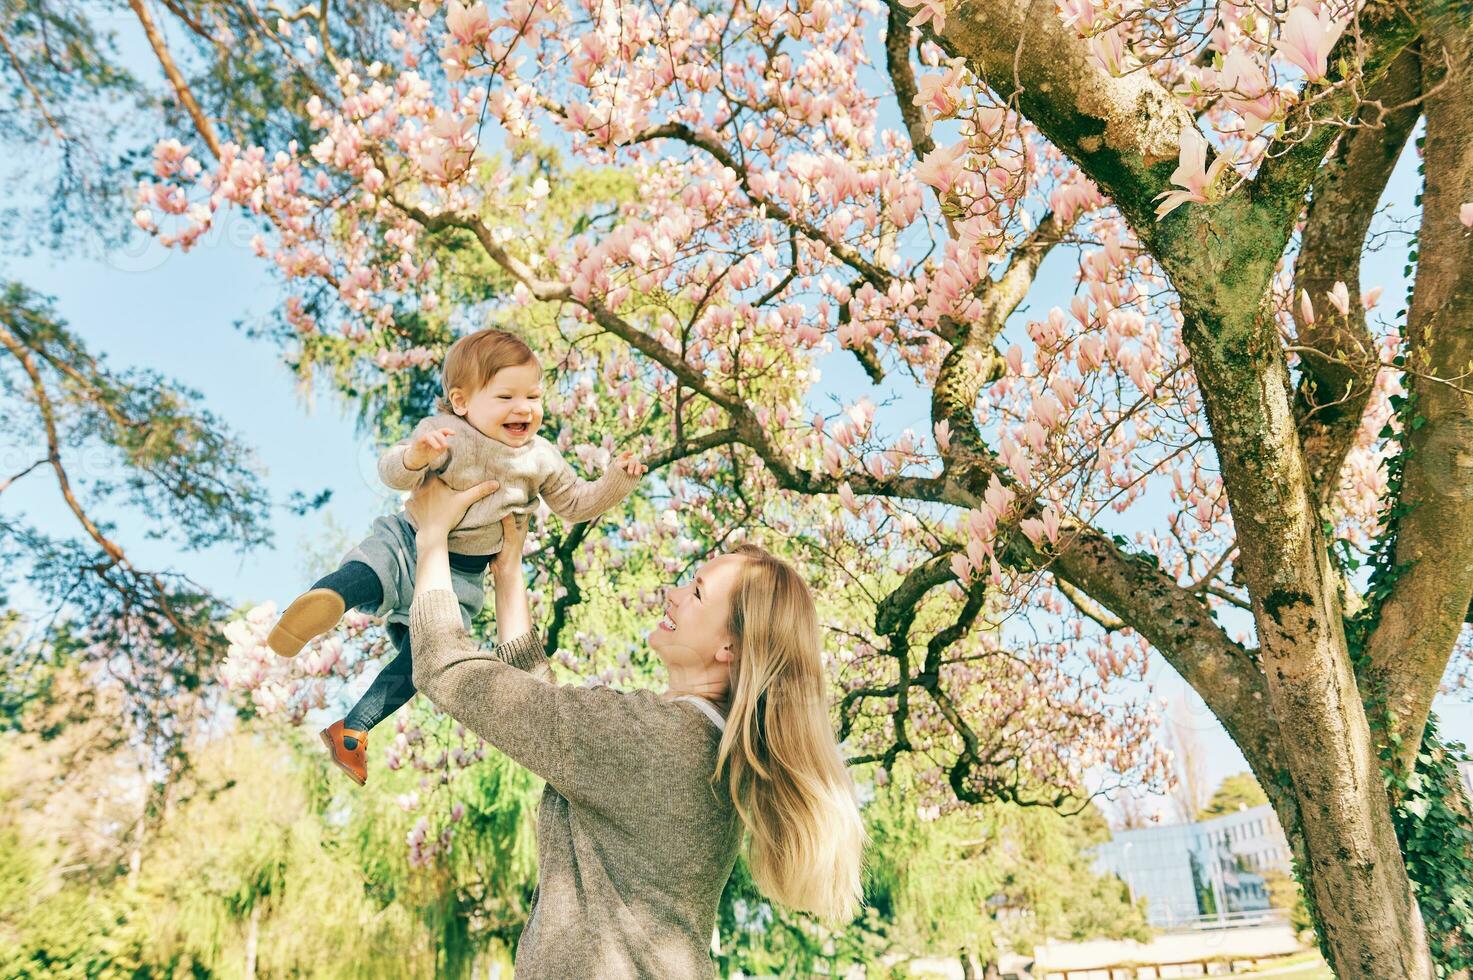 Outdoor portrait of happy young mother with adorable baby girl under blooming spring tree, having good time in sunny park photo